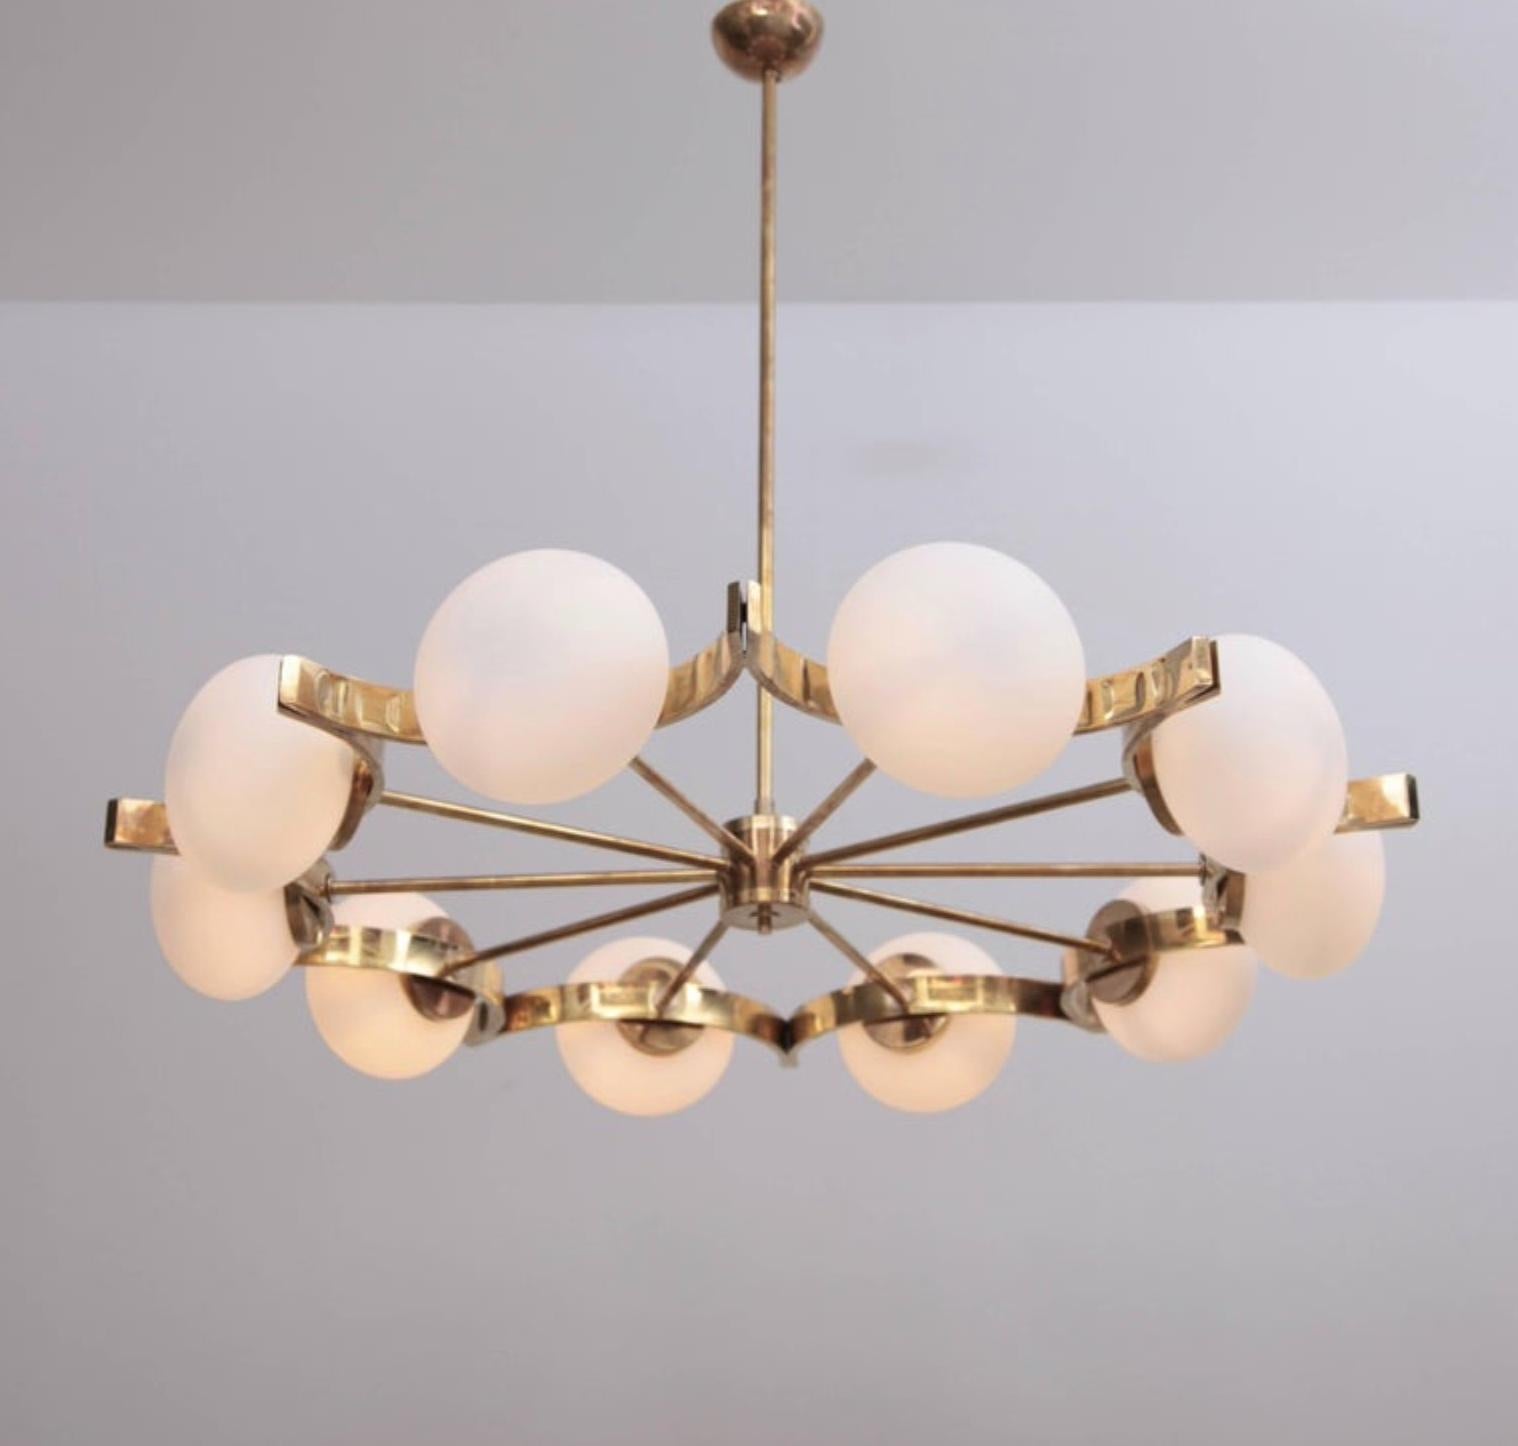 Huge Murano glass and brass Sputnik chandelier in the manner of Fontana Arte. The chandelier has a very impressing size and is a real eye catcher in every room. The chandelier is in excellent condition. To be on the the safe side, the lamp should be